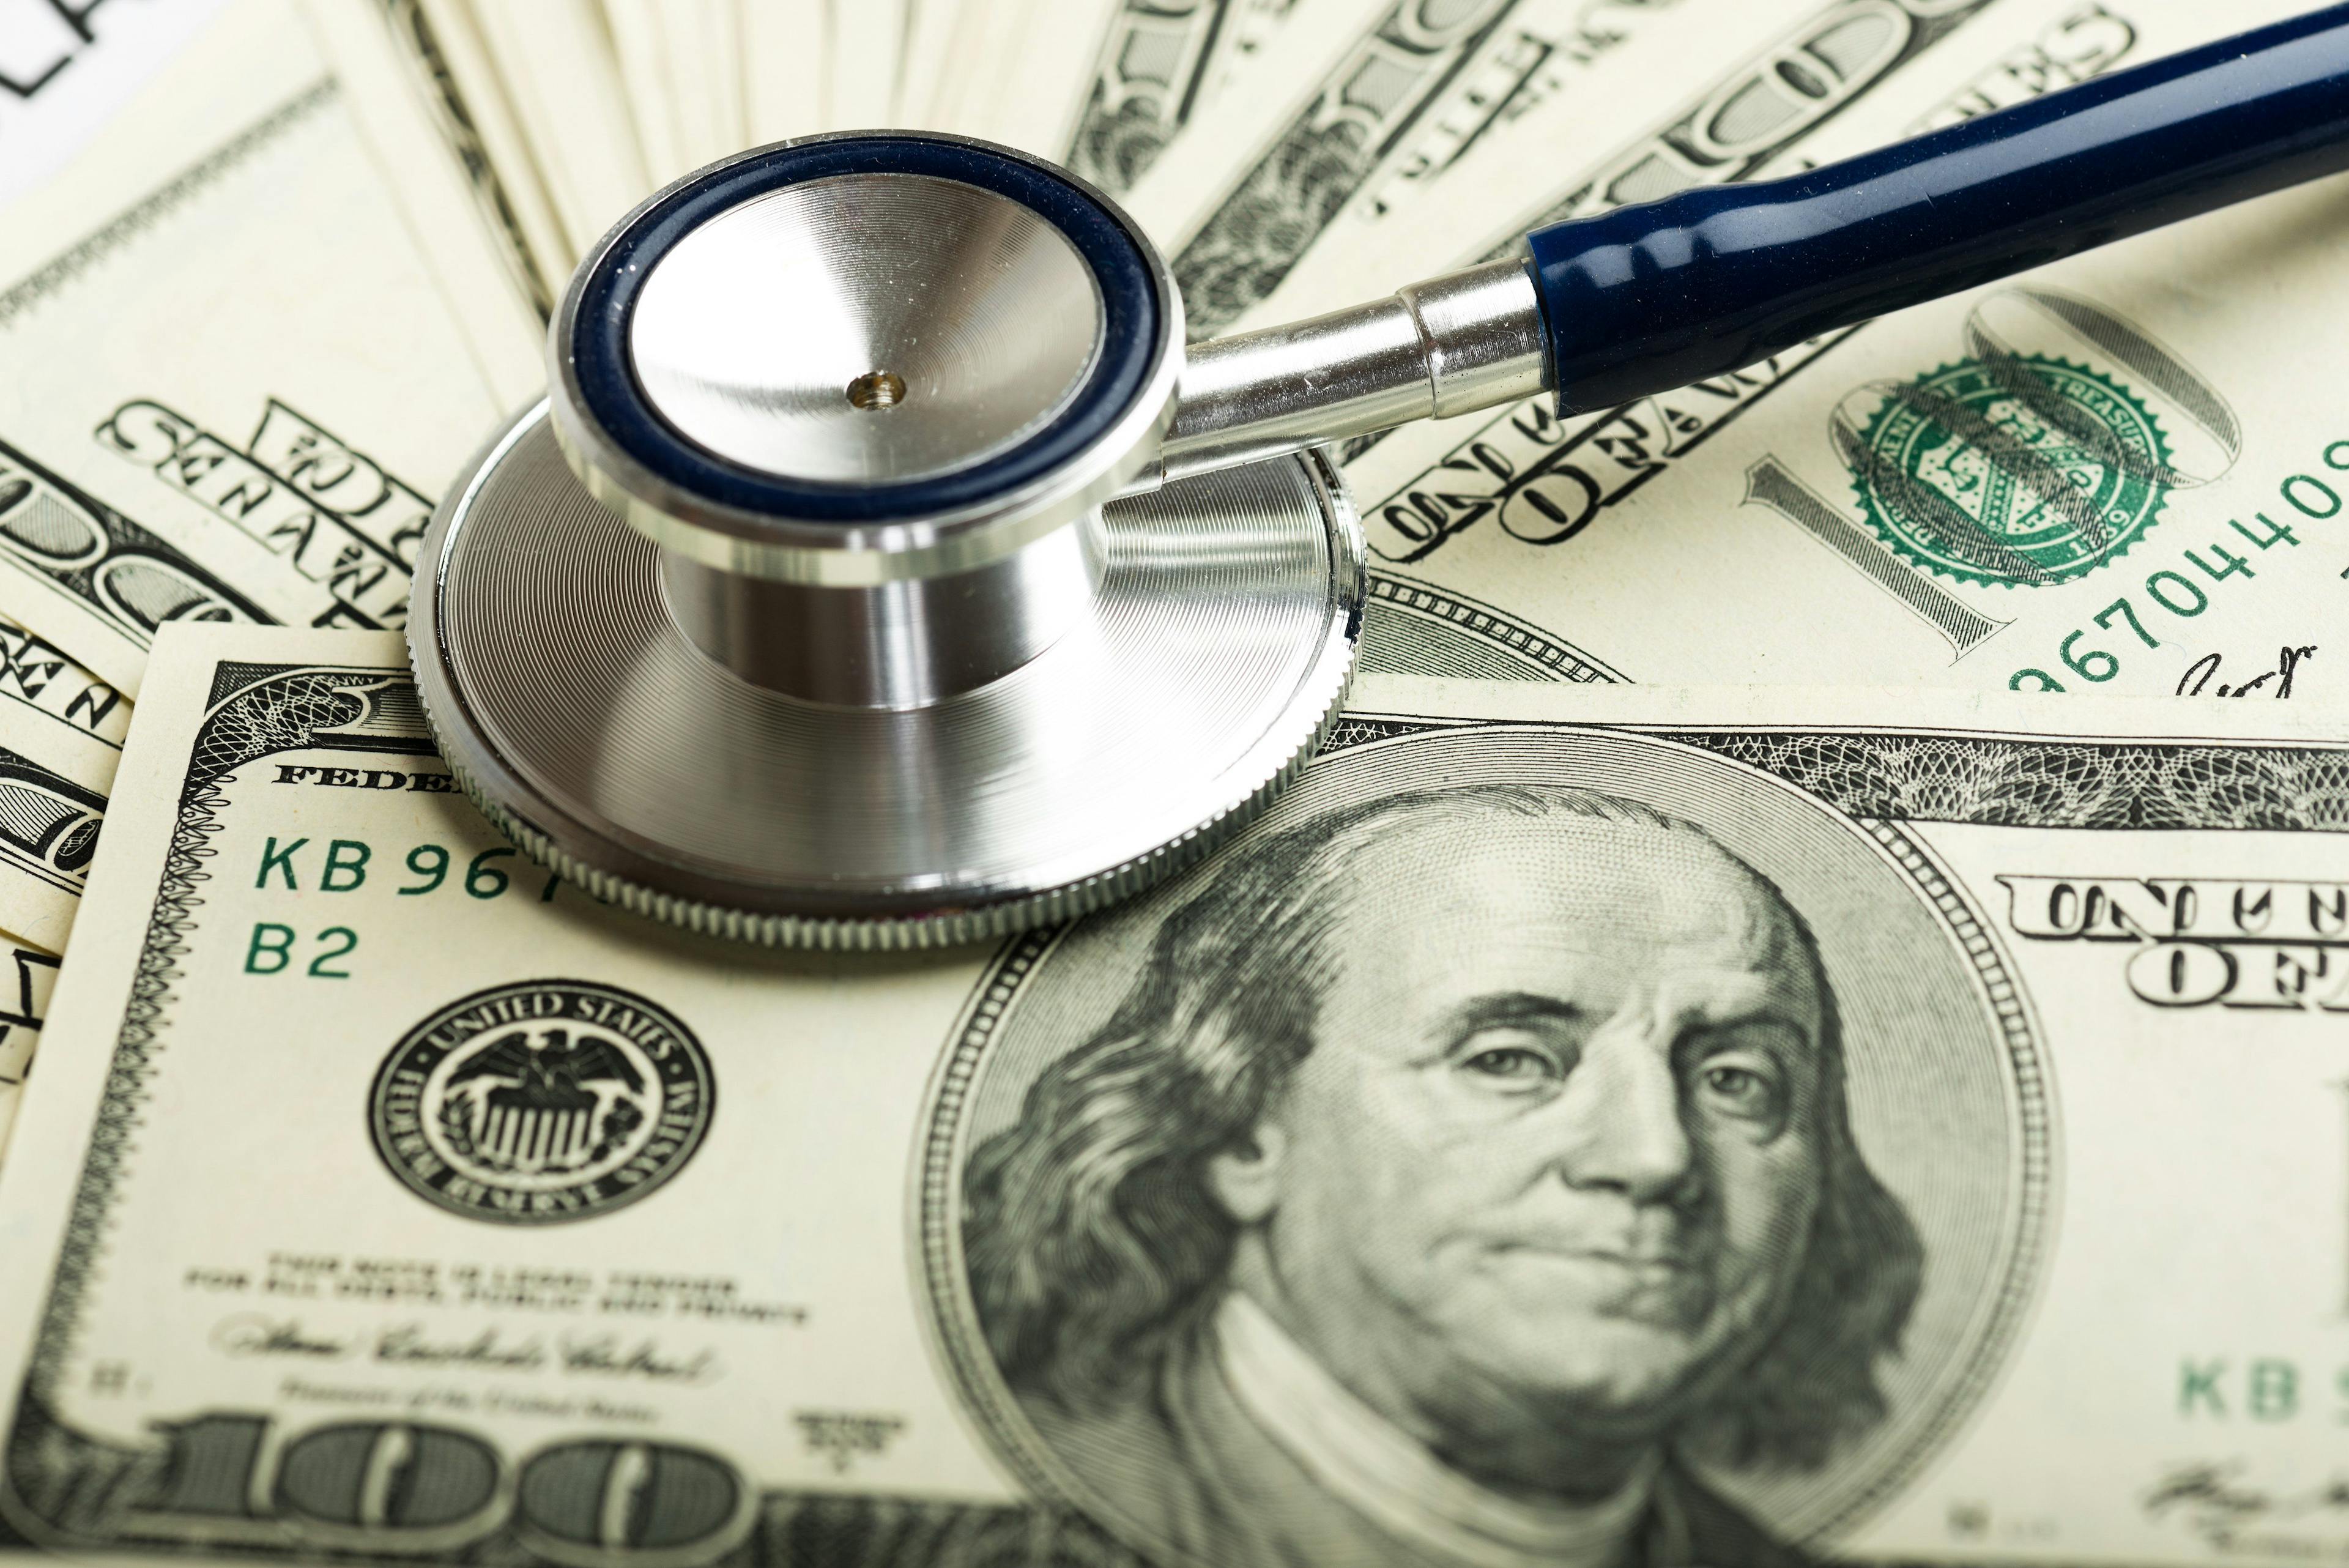 Where can medical practices get financial help?